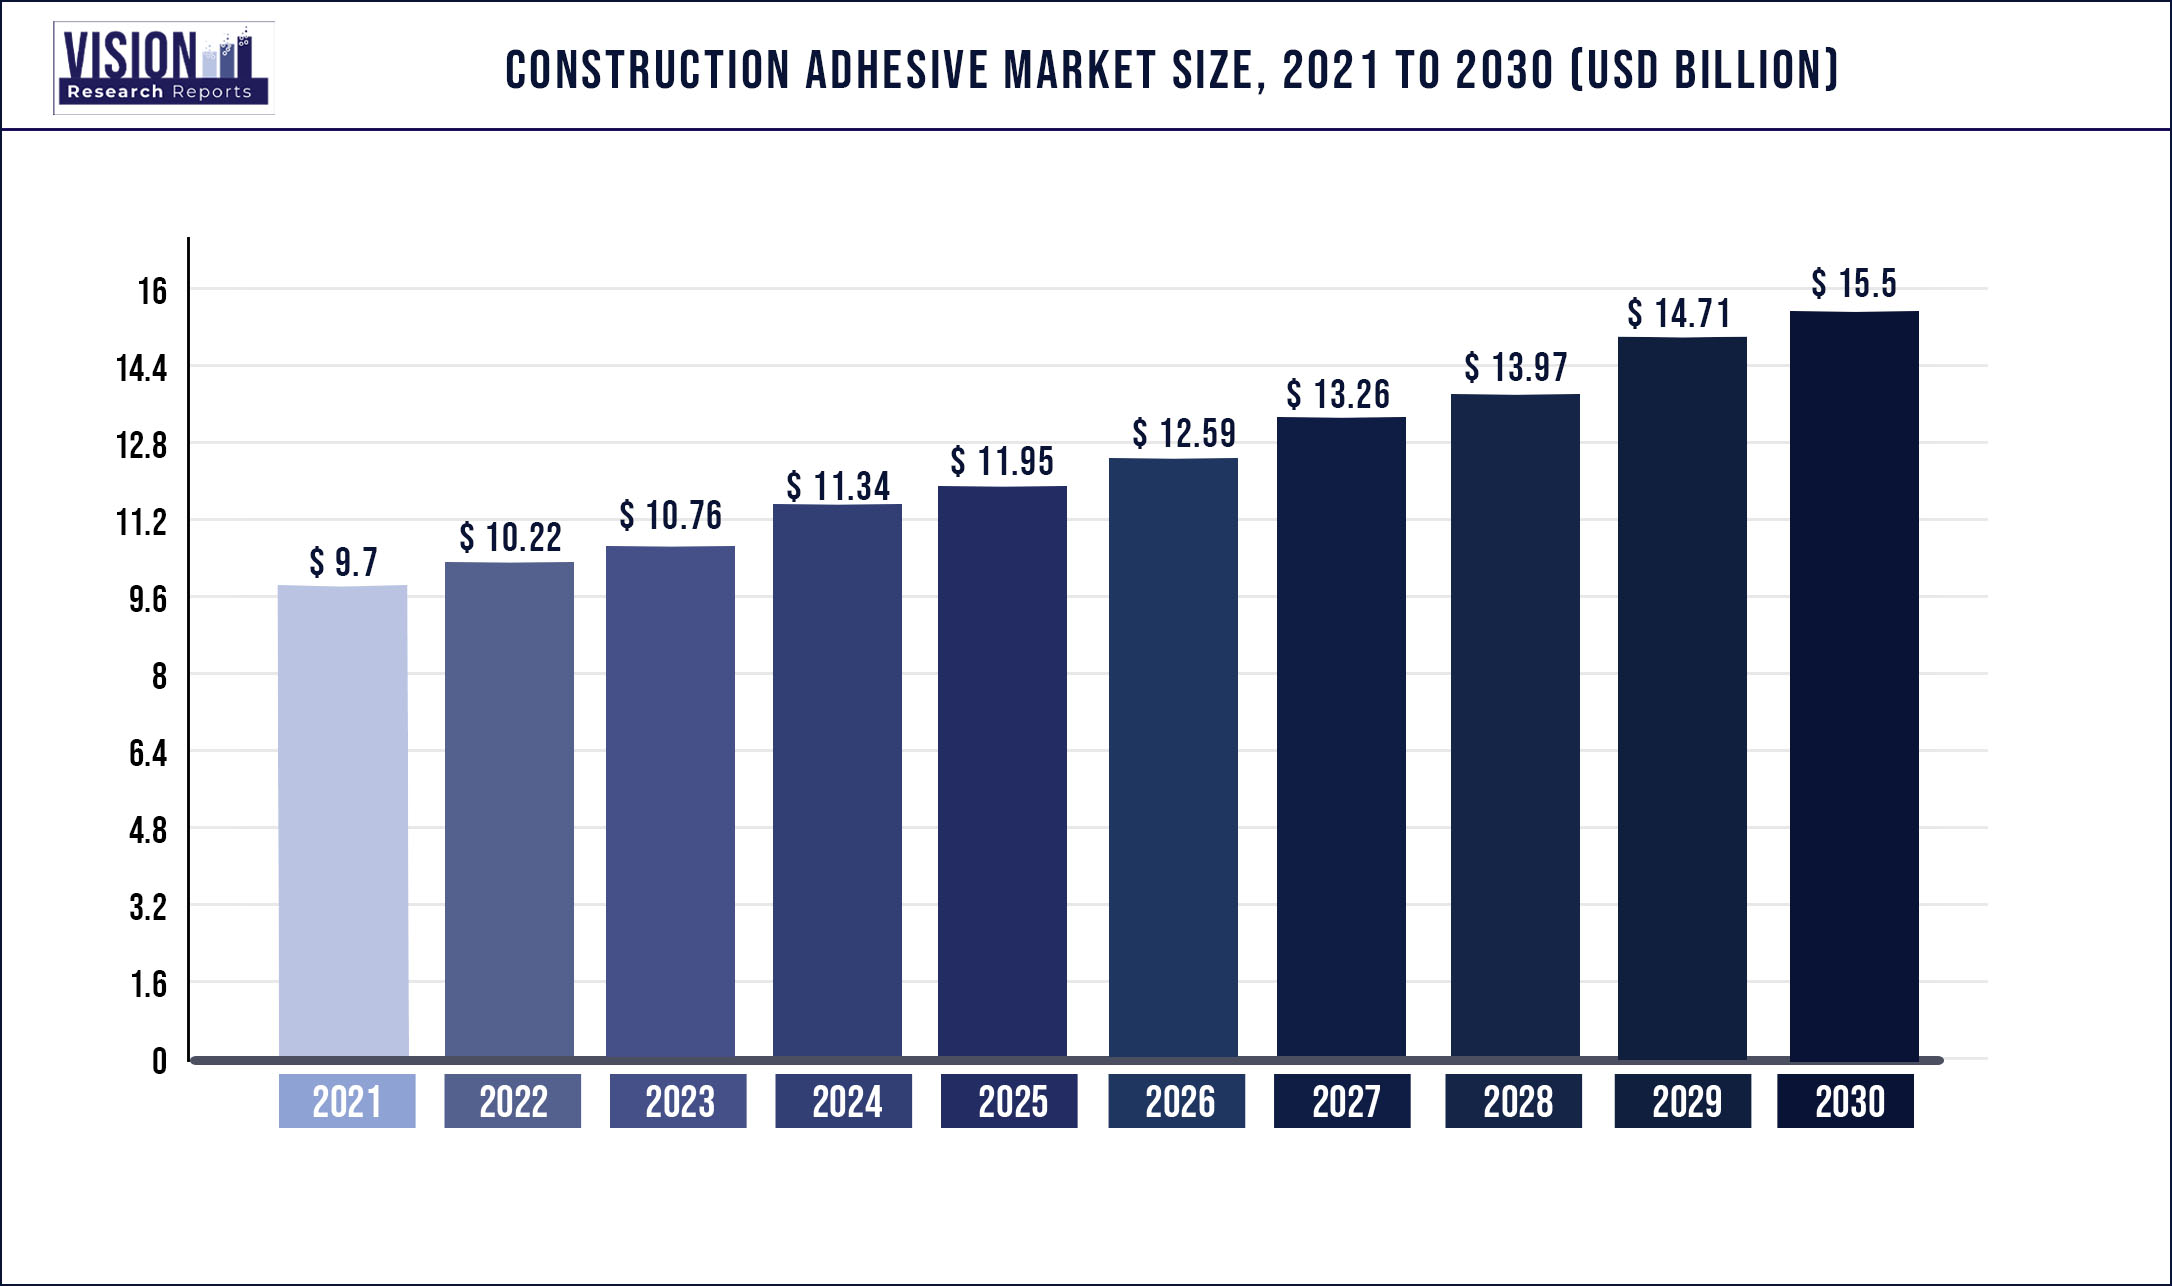 Construction Adhesive Market Size 2021 to 2030